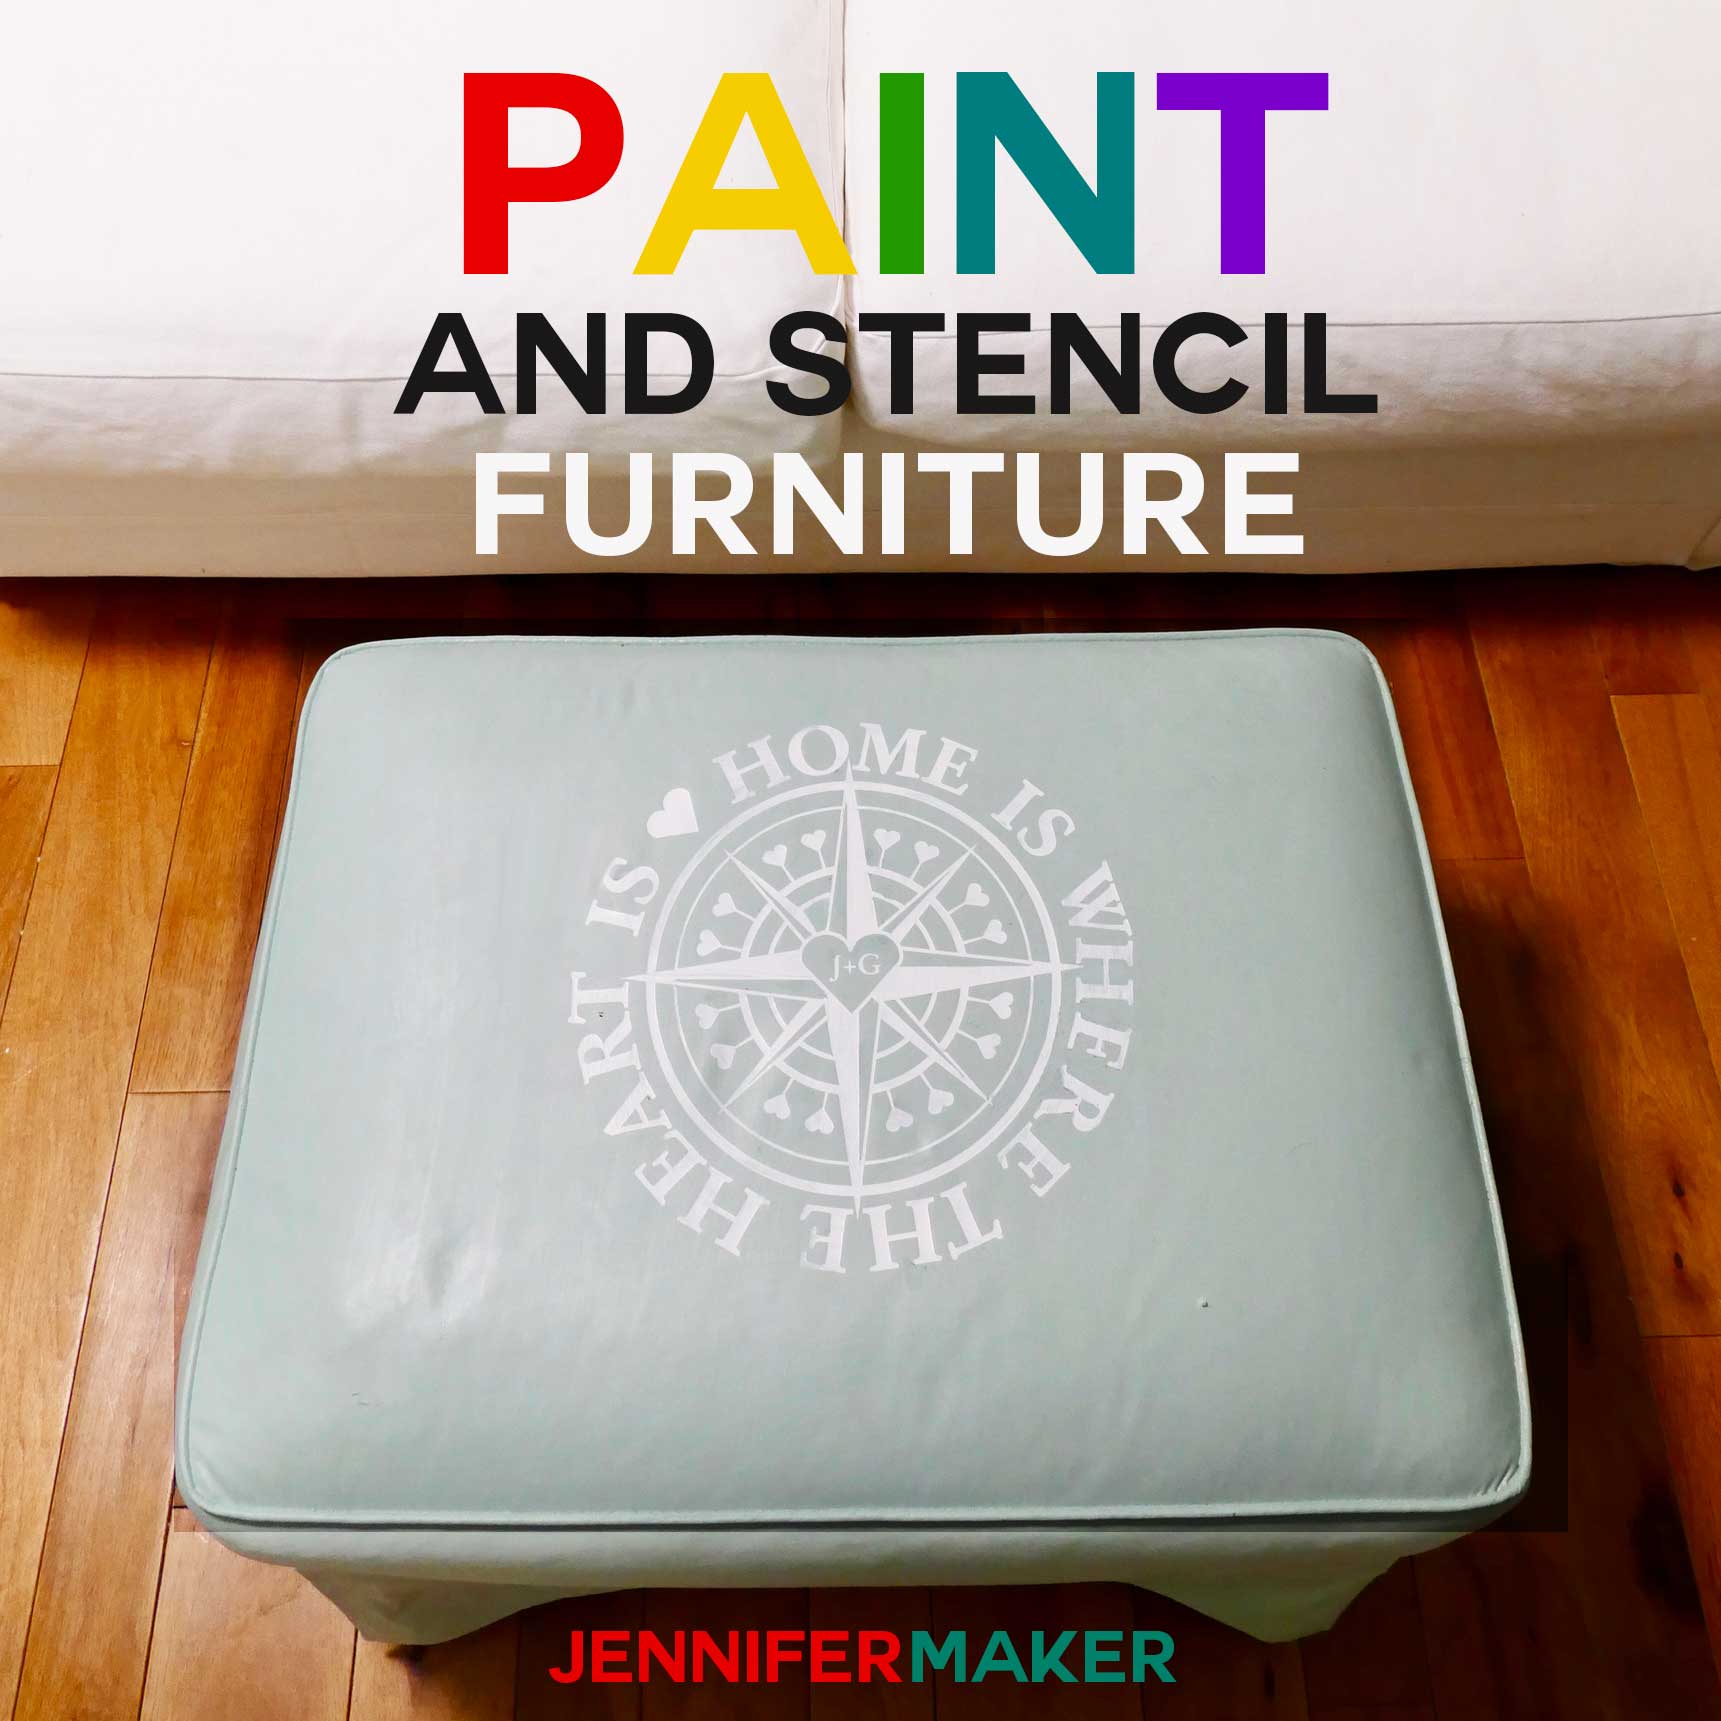 How to Paint Upholstered Furniture and Stencil it with a free home design #cricut #furniture #diyhomedecor #svgcutfile #coastal